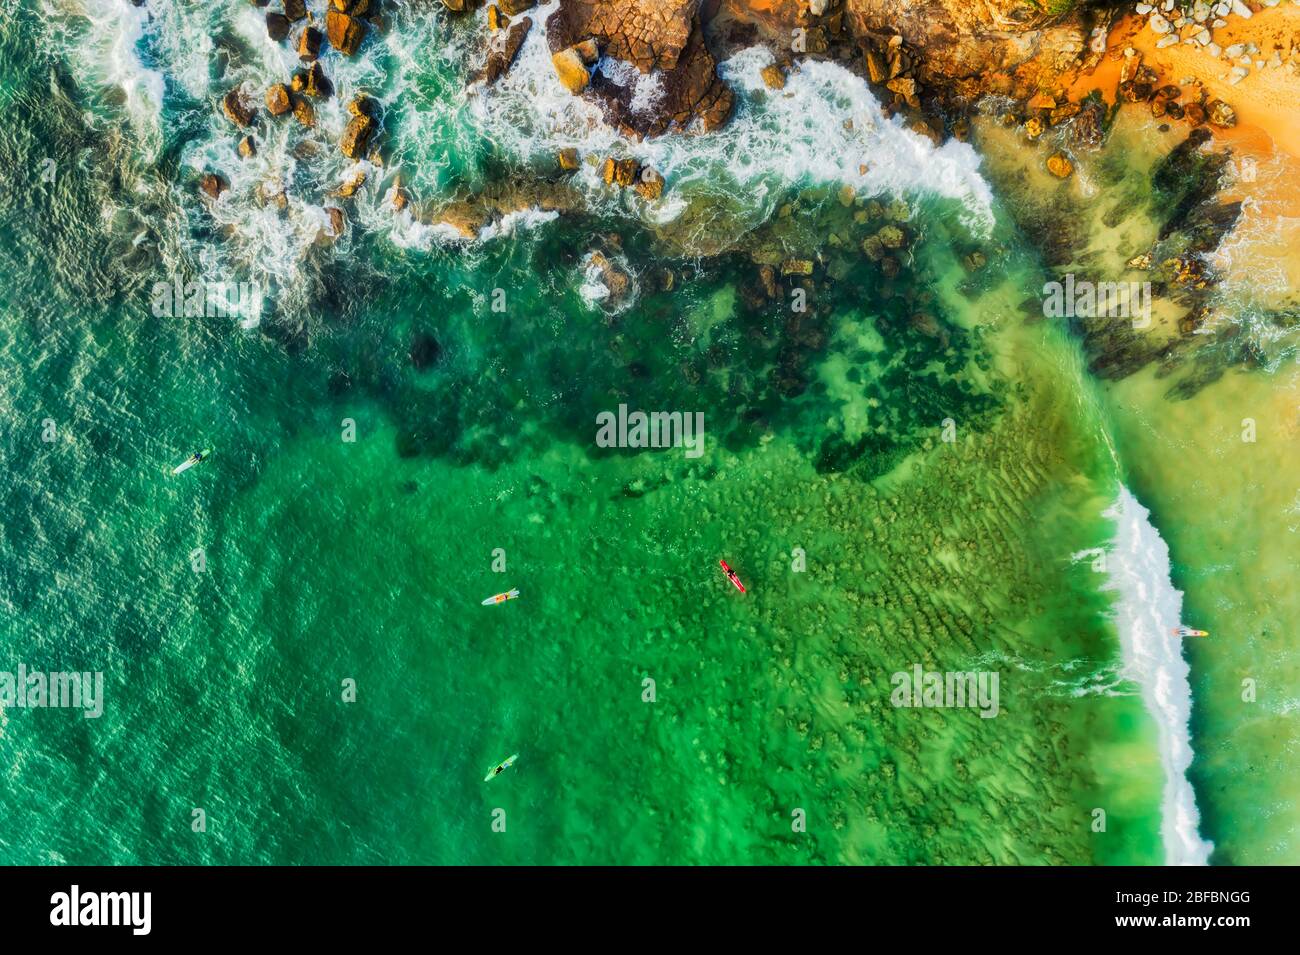 Top down aerial view of board surfers floating and riding the waves on Australian northern beaches. Stock Photo